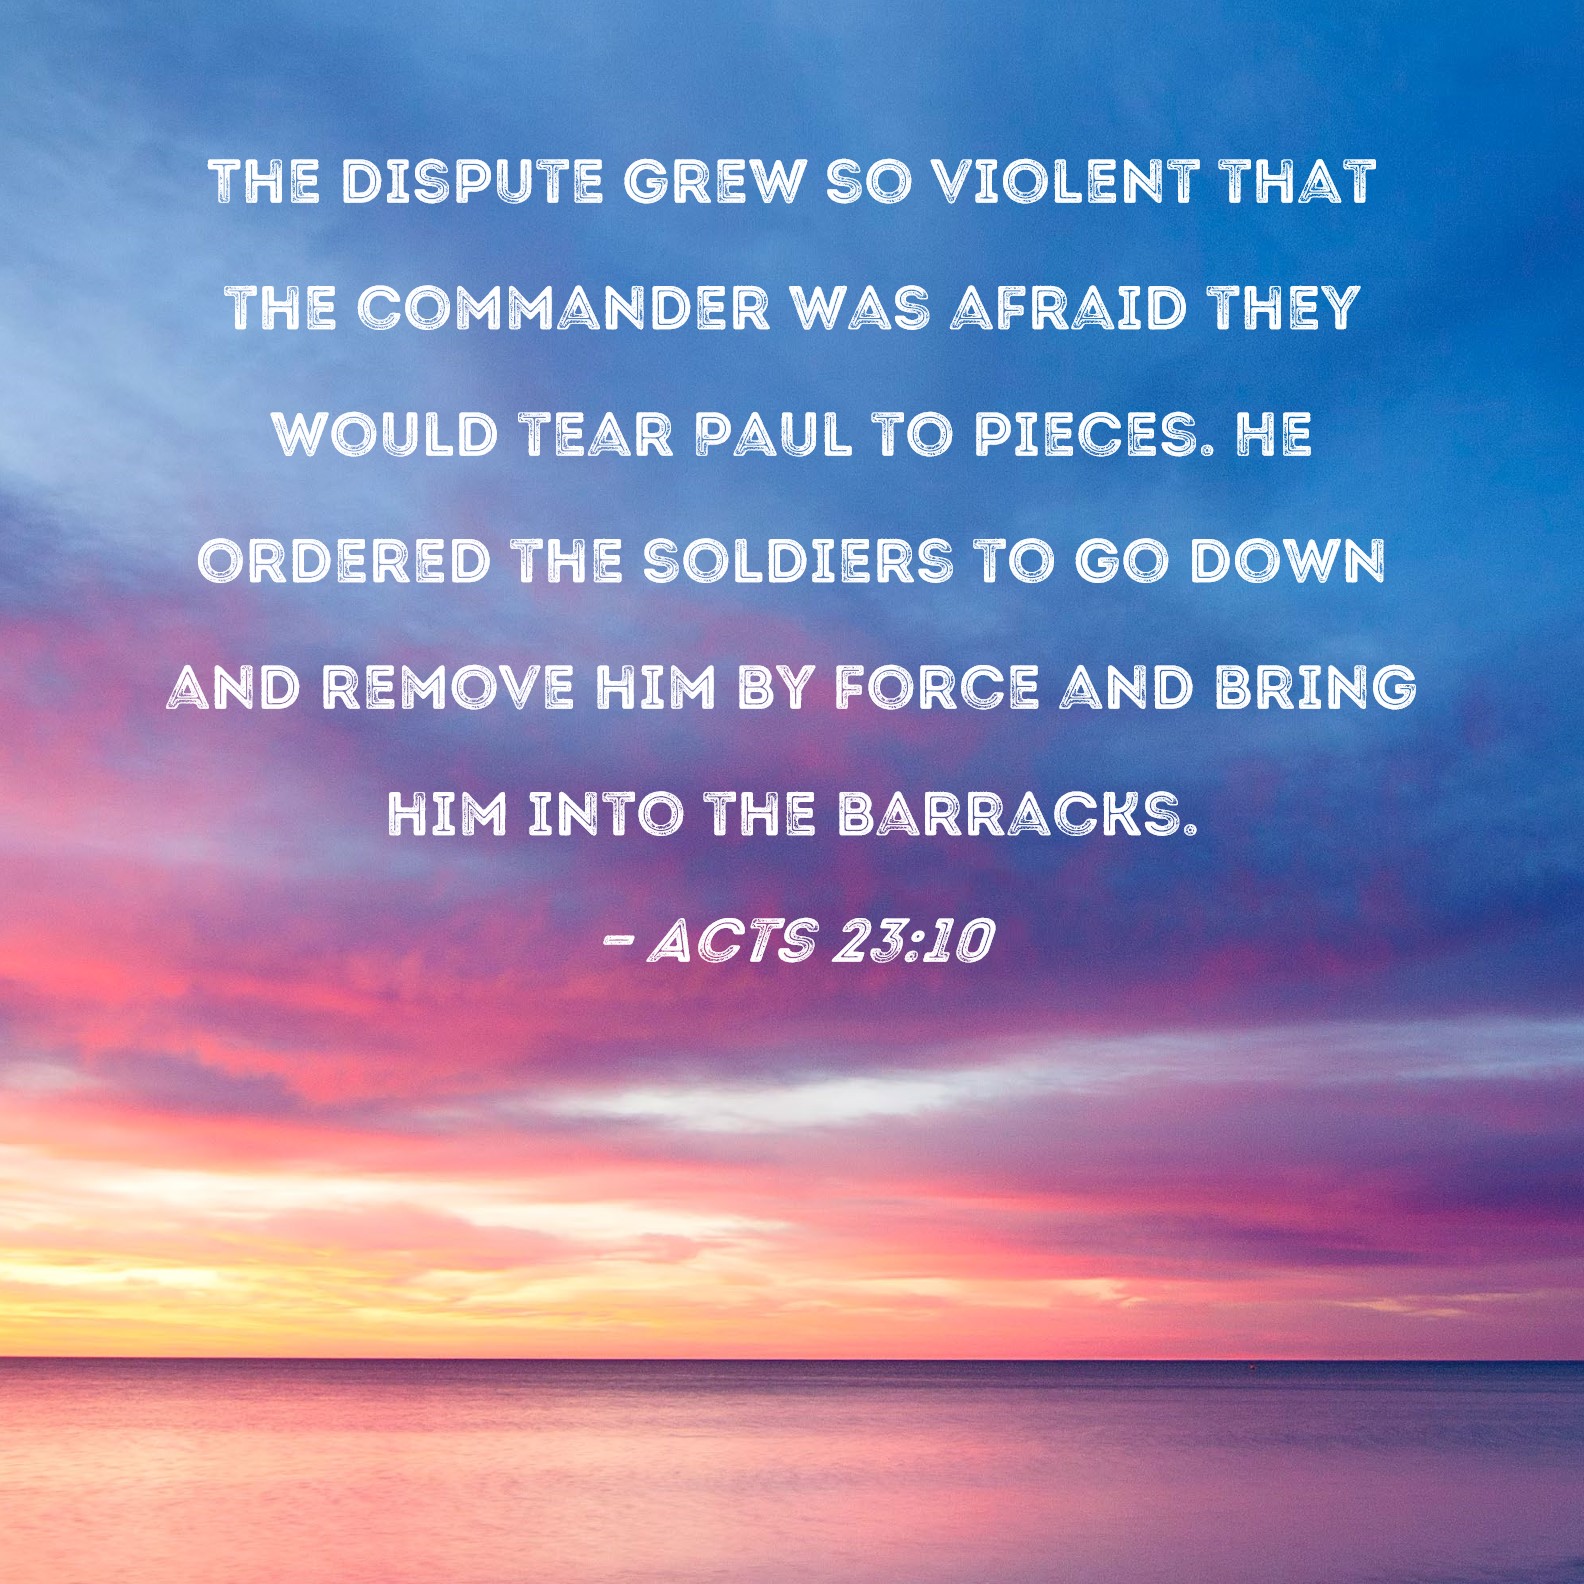 Acts 2310 The dispute grew so violent that the commander was afraid